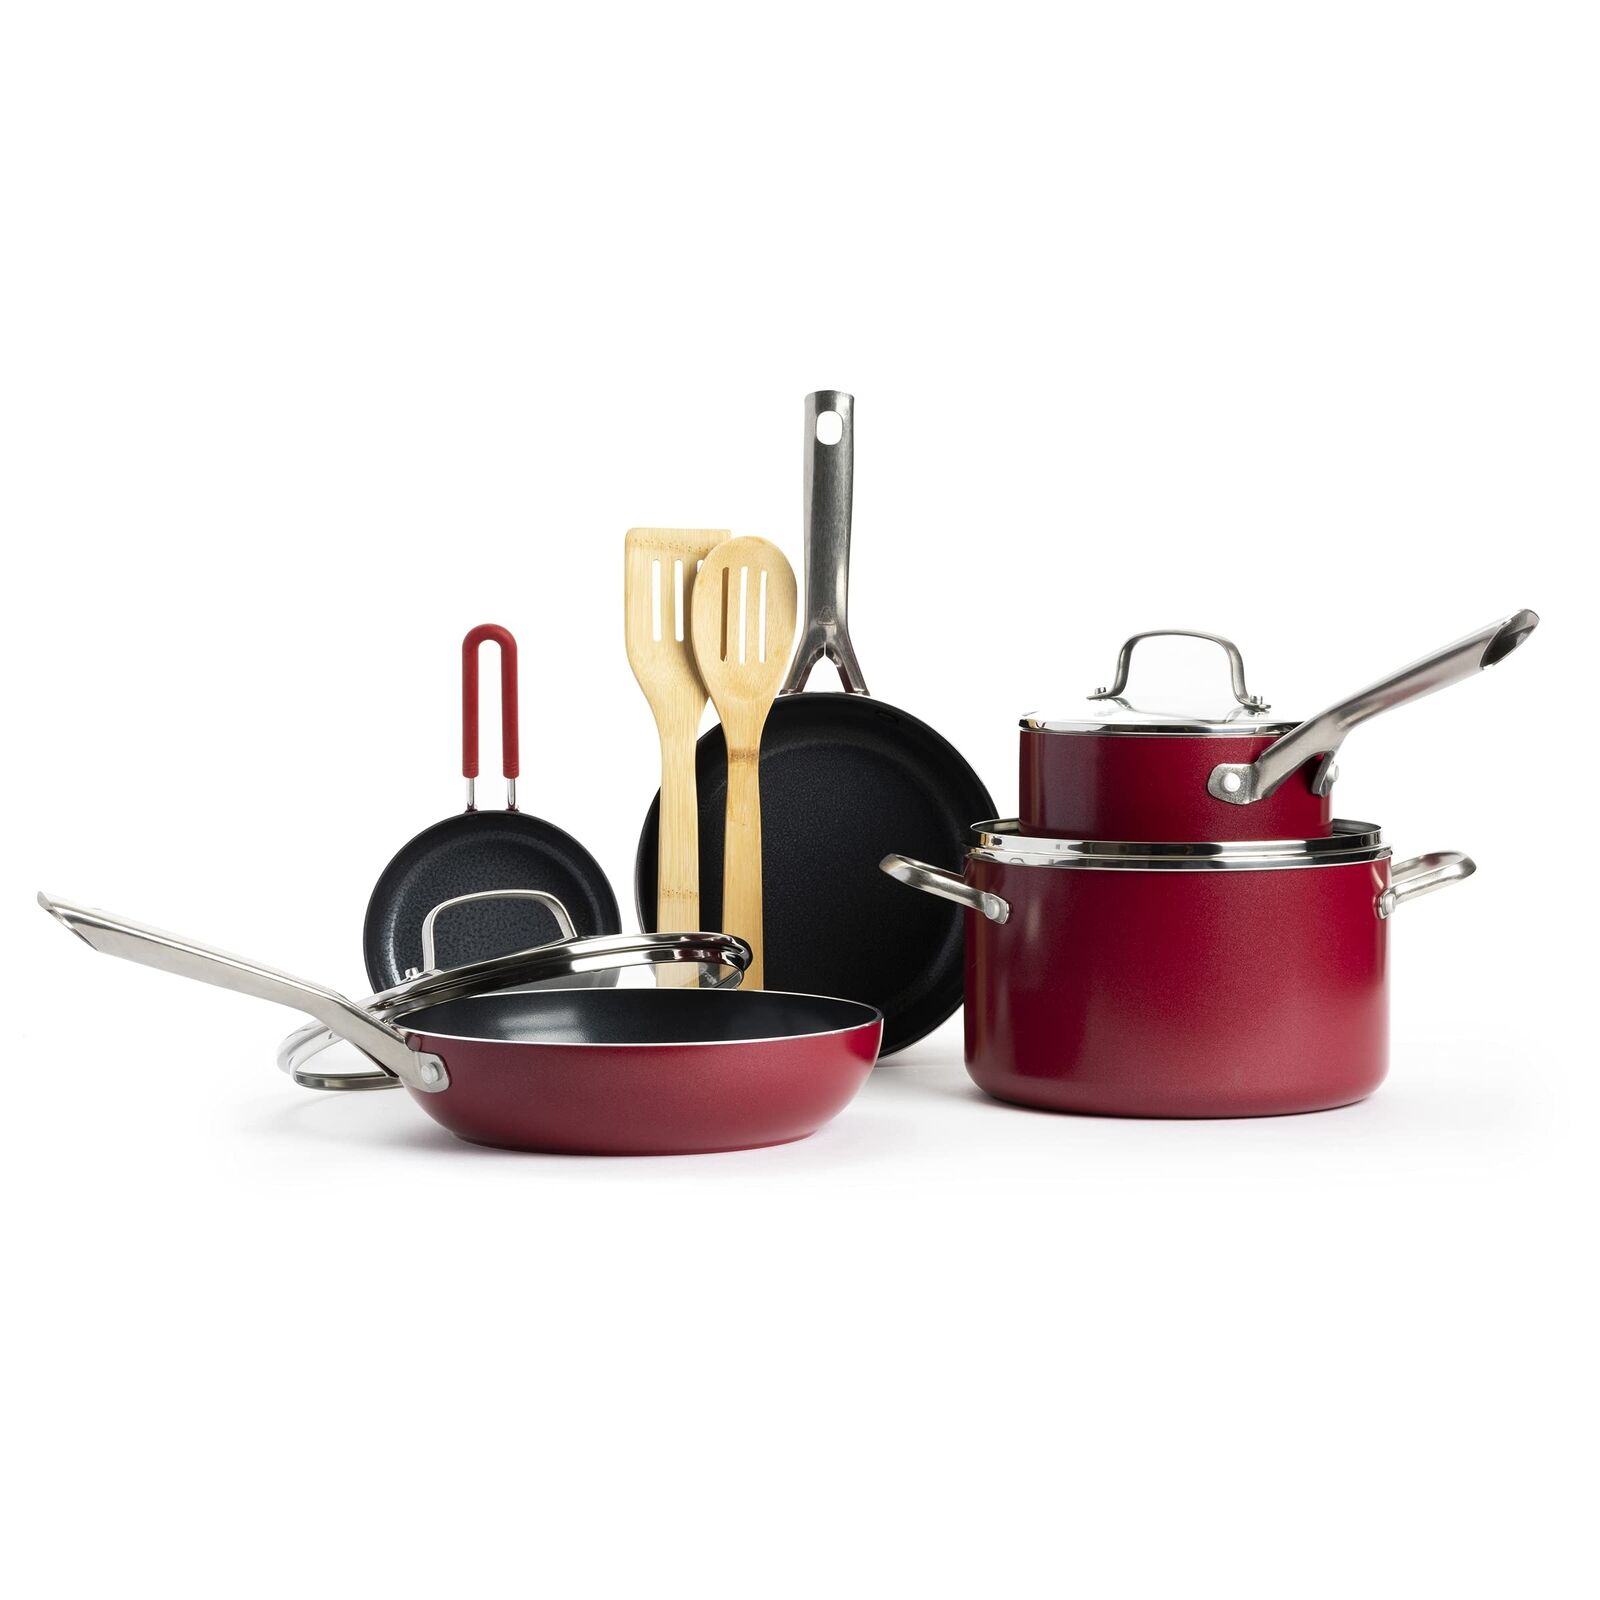 Red Volcano Textured Ceramic Nonstick 10 Piece Cookware Pots and Pans Set wit...